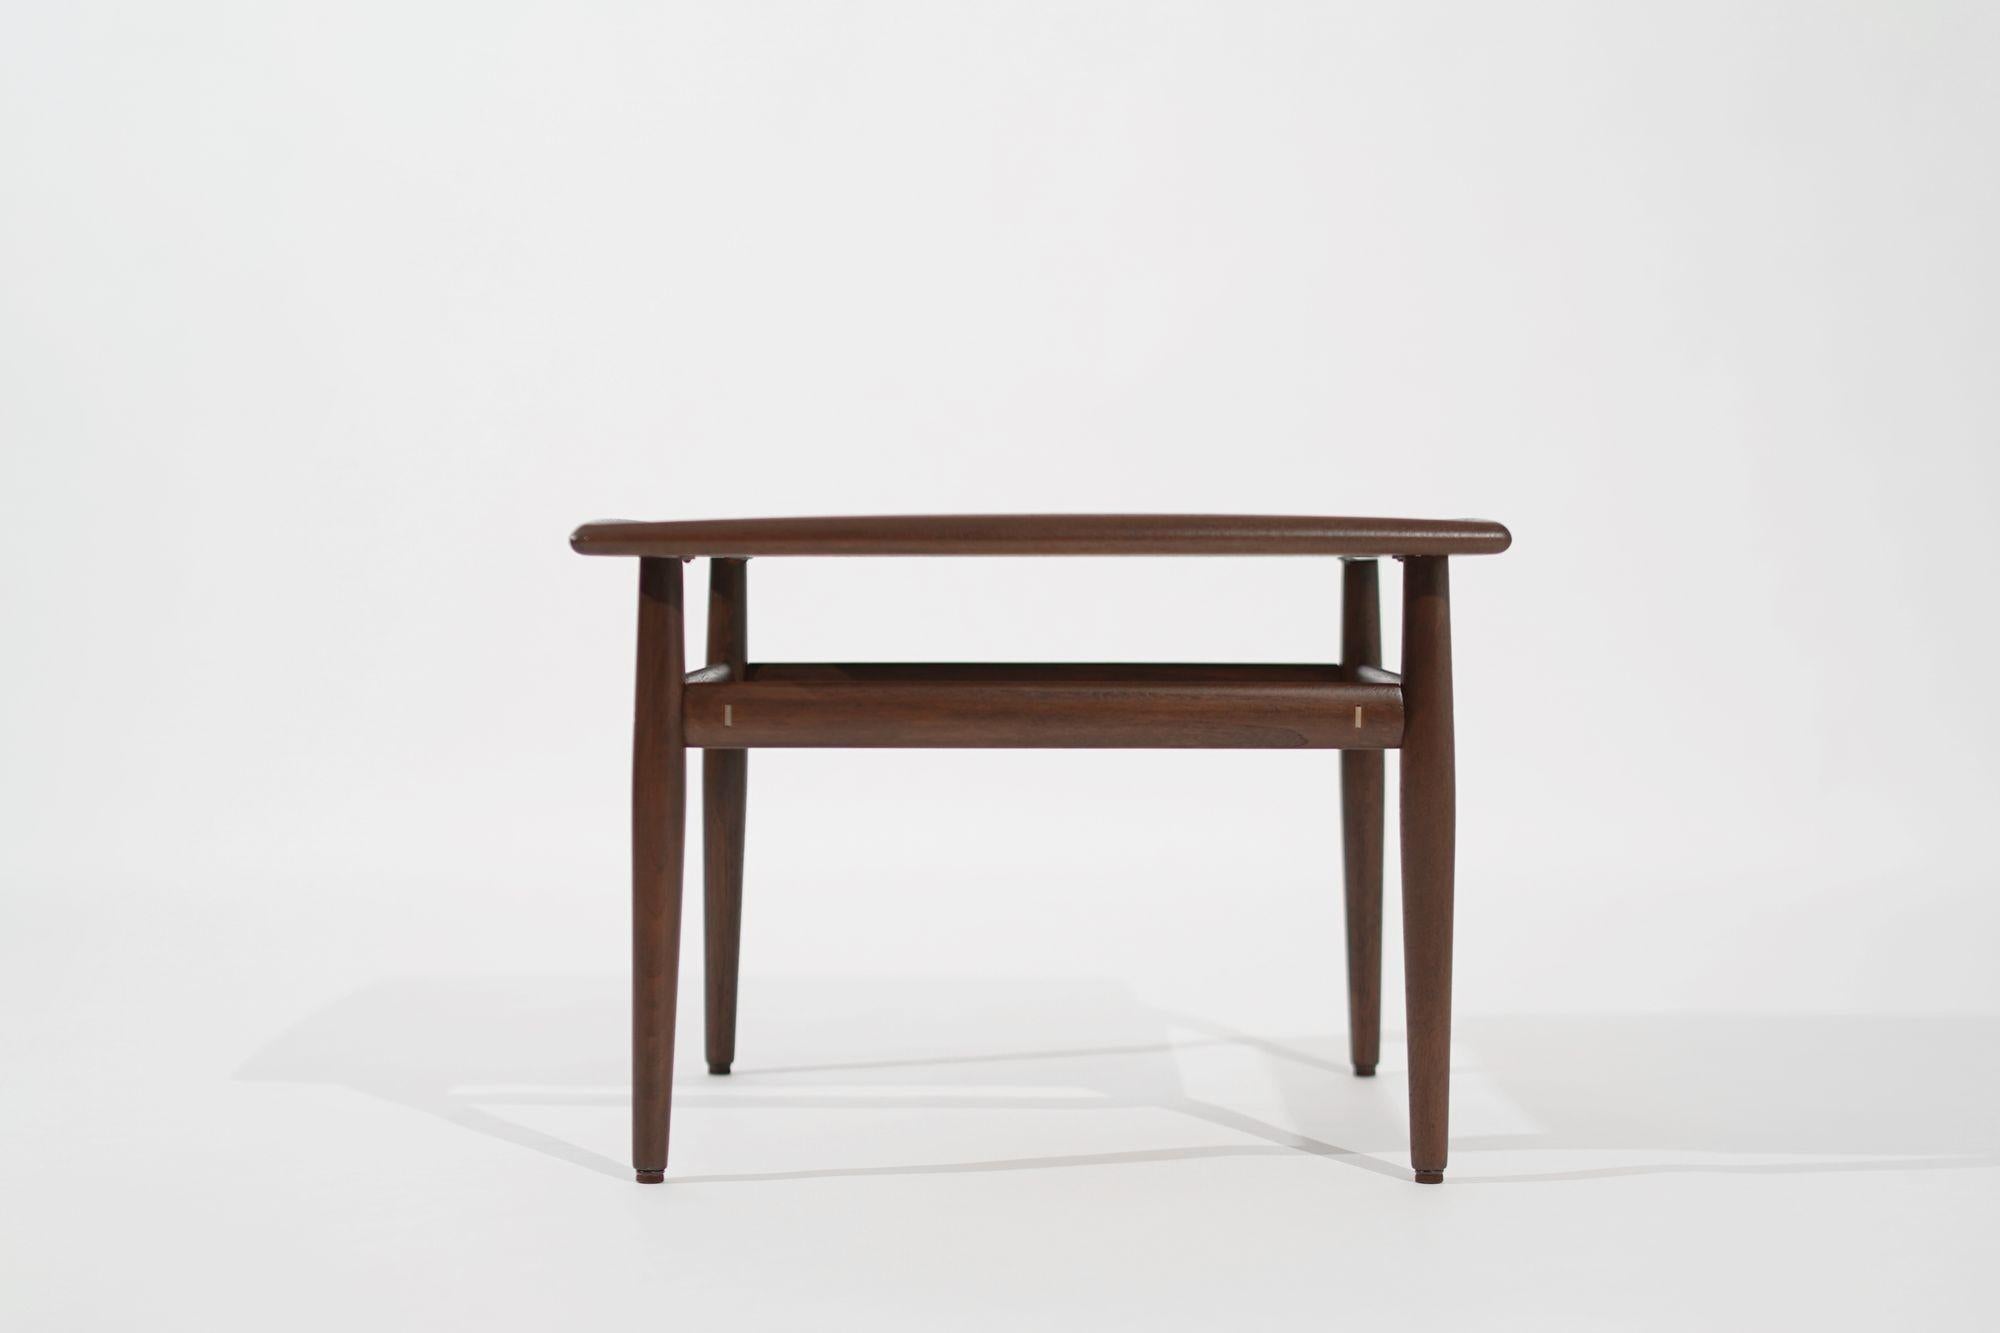 Indulge in the enduring charm of mid-century modern design with our meticulously restored Teak Coffee/End Table, a 1950s masterpiece by Danish designer Grete Jalk for Mobelfabrik, immaculately revived by Stamford Modern. Crafted with precision, this